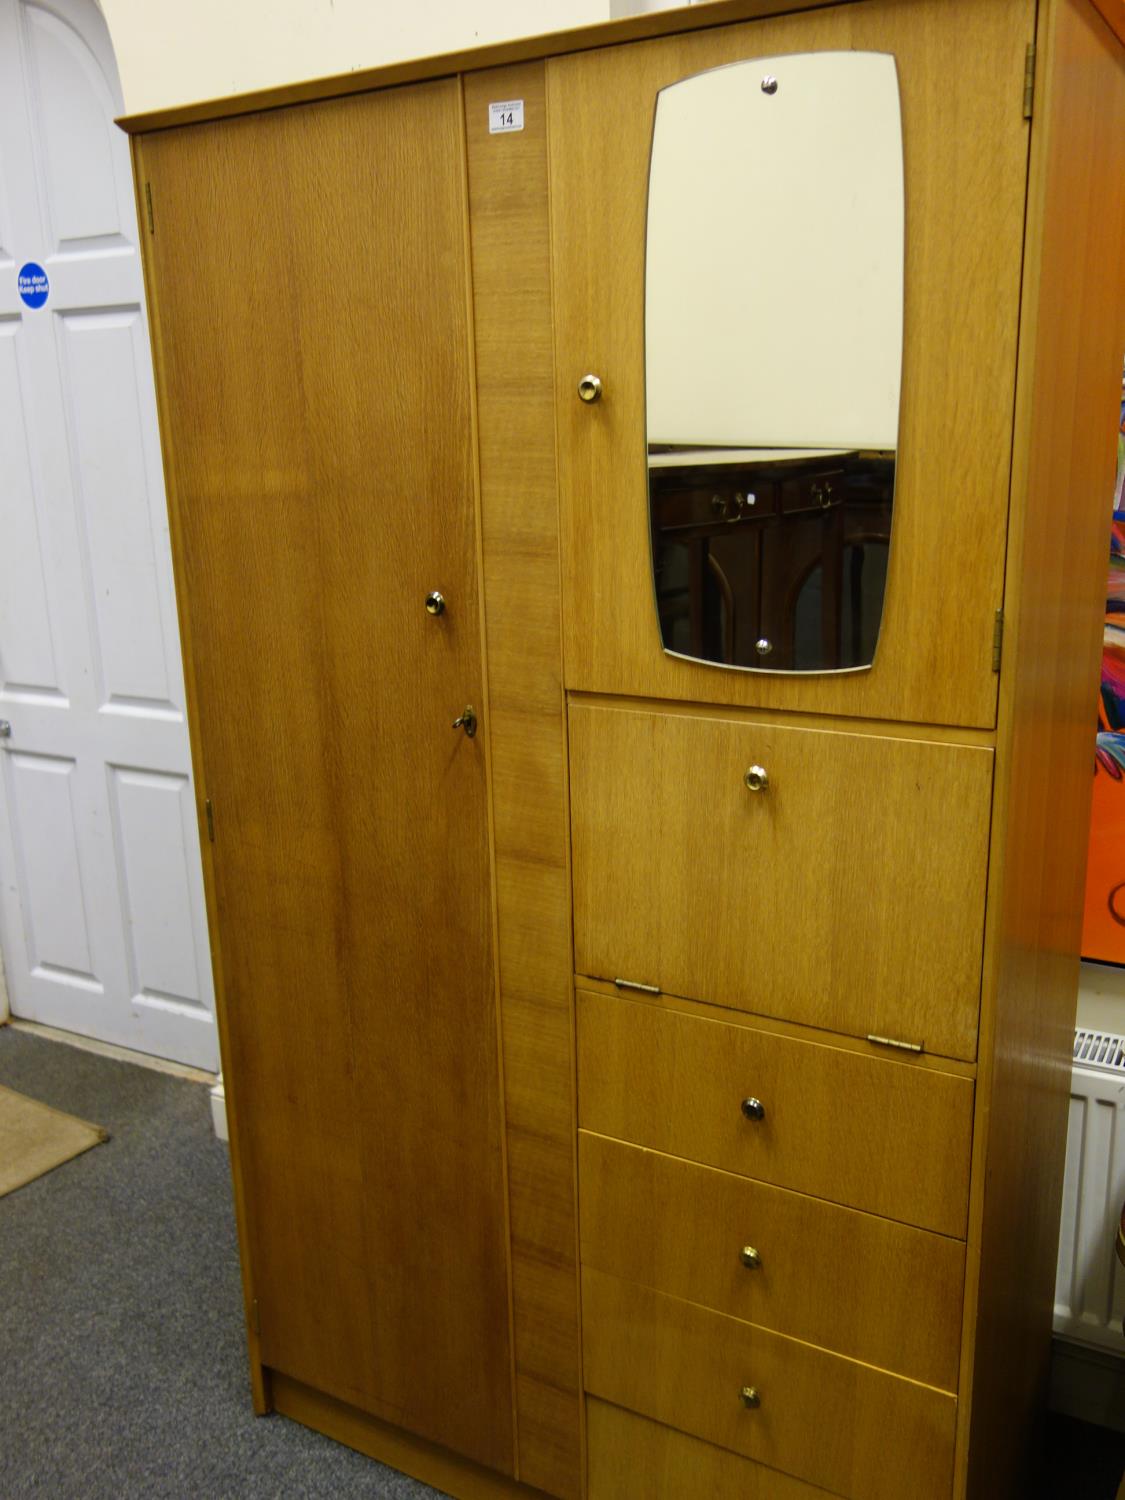 1960's ply wood compactum unit with accompanying bedside table, a cluster of drawers and a single